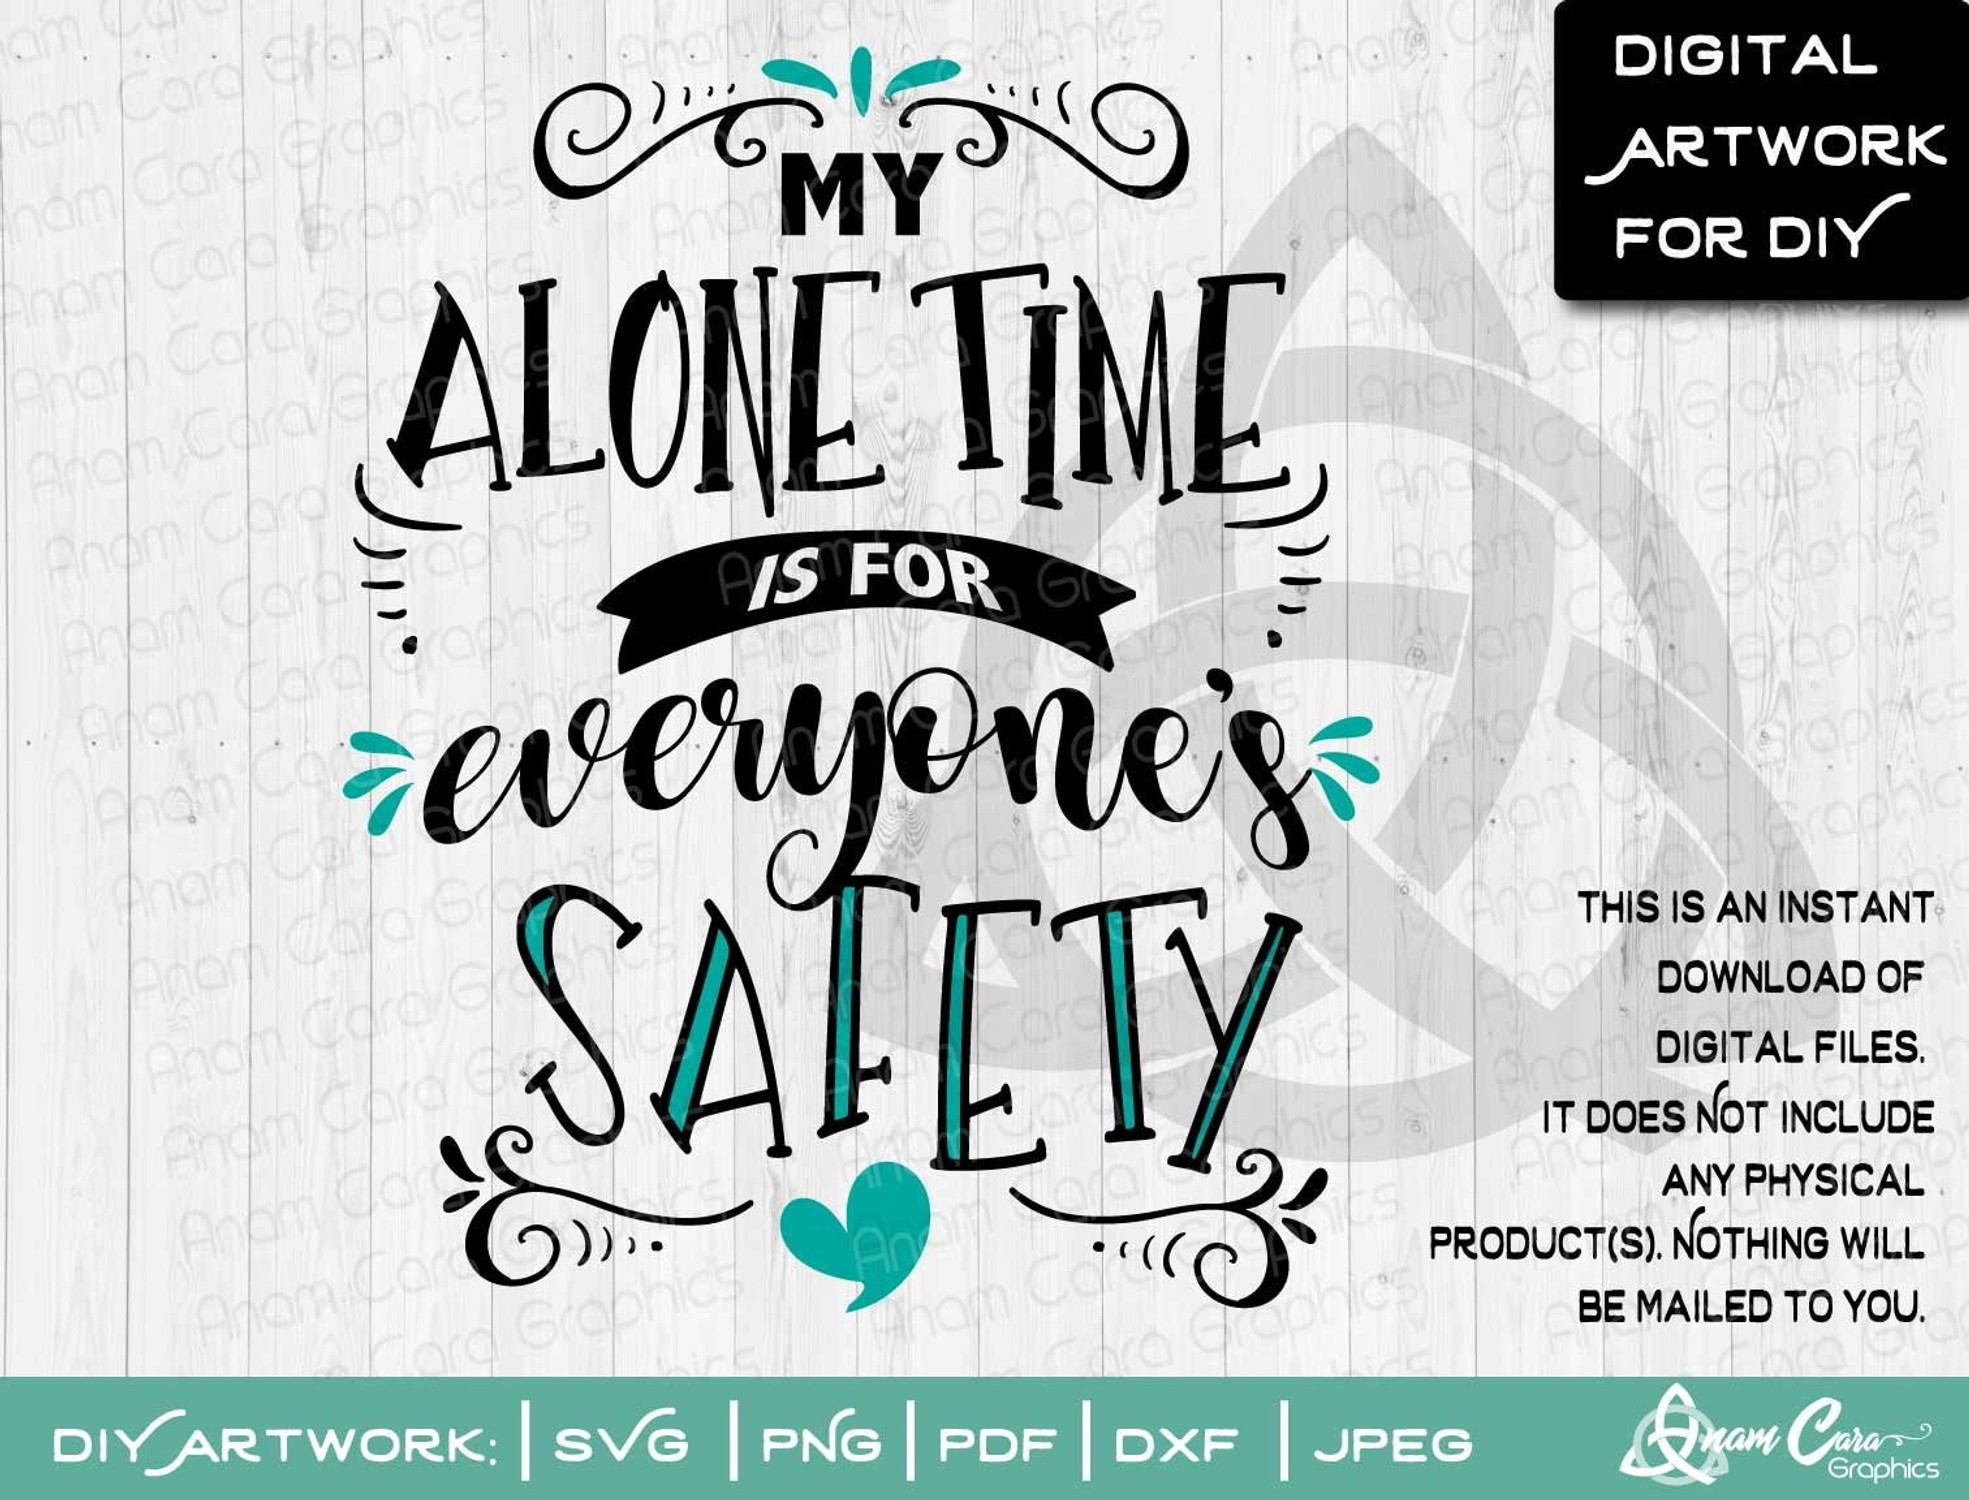 My Alone time is for Everyone's Safety